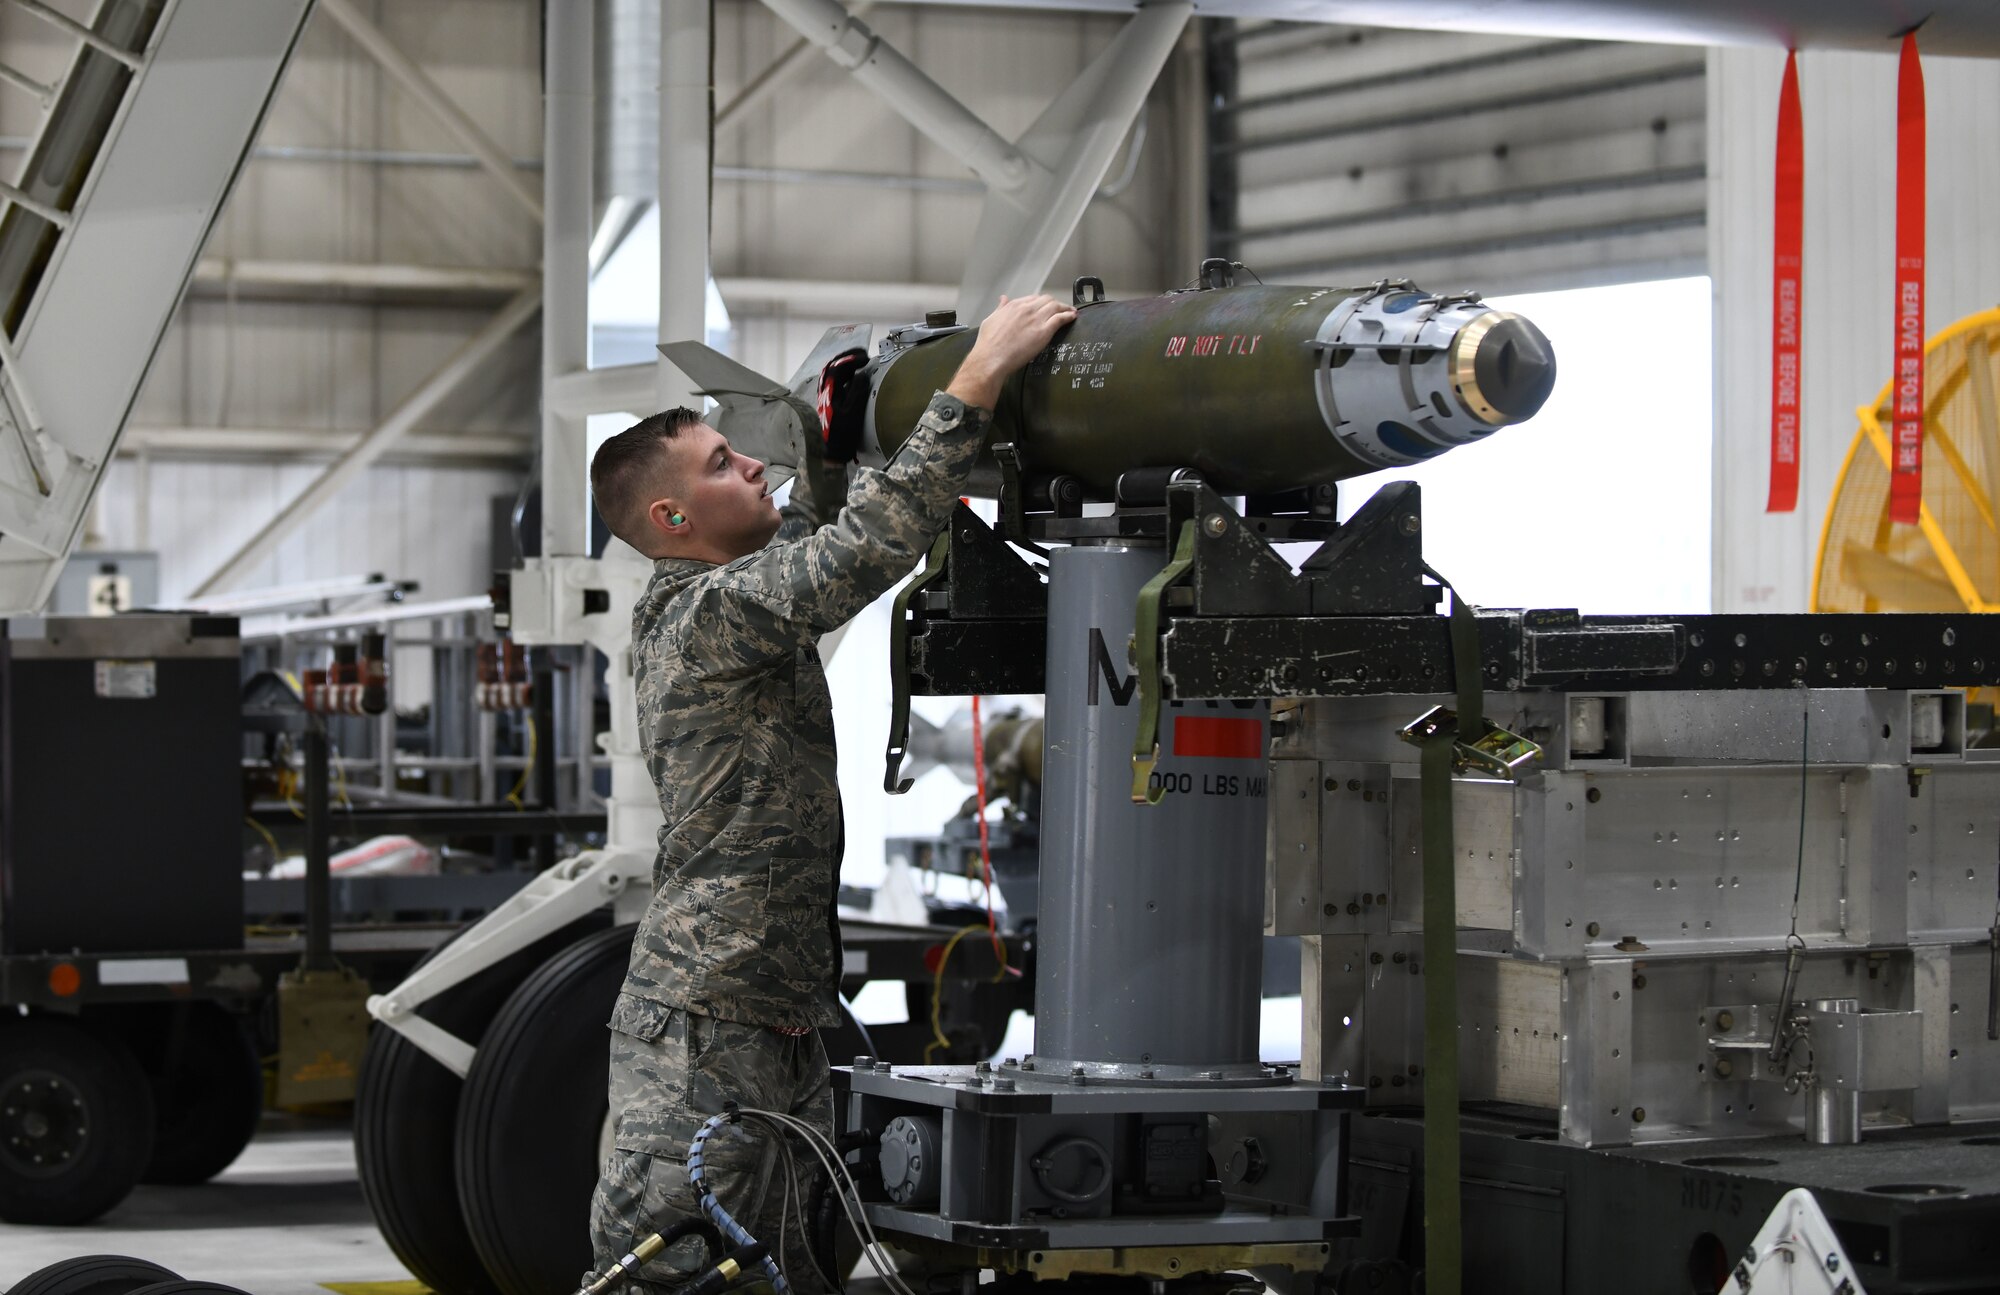 Airman 1st Class Falcon Wilson, a 34th Aircraft Maintenance Unit load crew member, inspects an inert GBU-38 Joint Direct Attack Munition for damage prior to loading it onto a simulated B-1 bomber at the annual weapons load competition at Ellsworth Air Force Base, S.D., Jan.7, 2019.  Each load crew is made up of four Airmen, with each one being responsible for a different aspect of the operation. (U.S. Air Force photo by Airman 1st Class Christina Bennett)